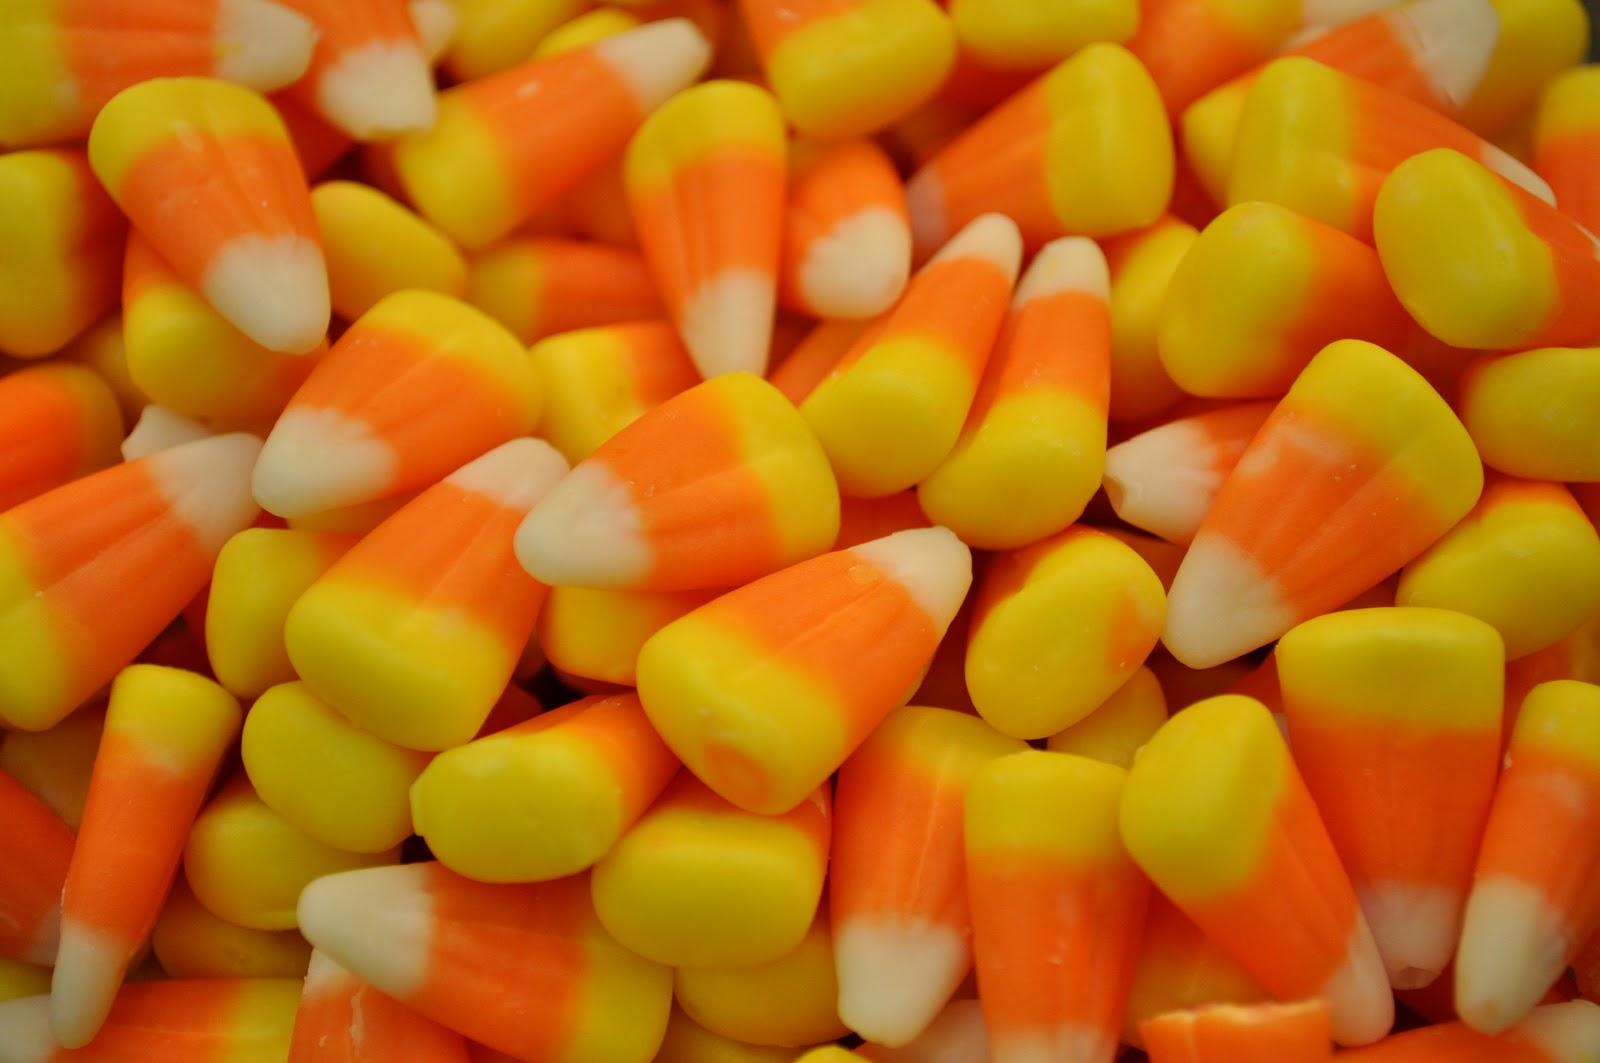 Best Sweet of candies with lollipop and candy corn